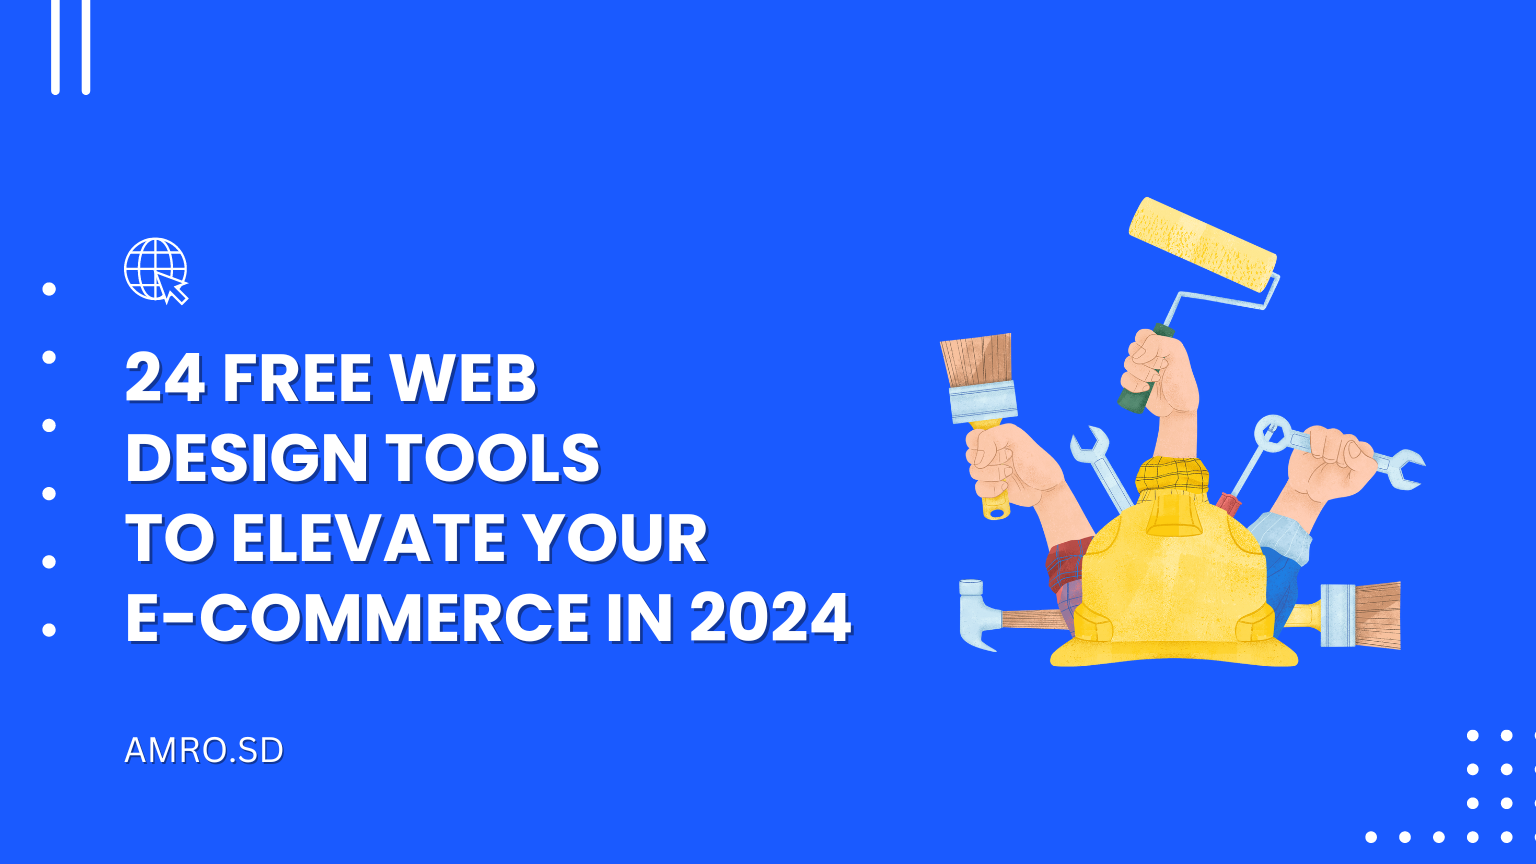 24 Free Web Design Tools to Elevate Your E-commerce in 2024